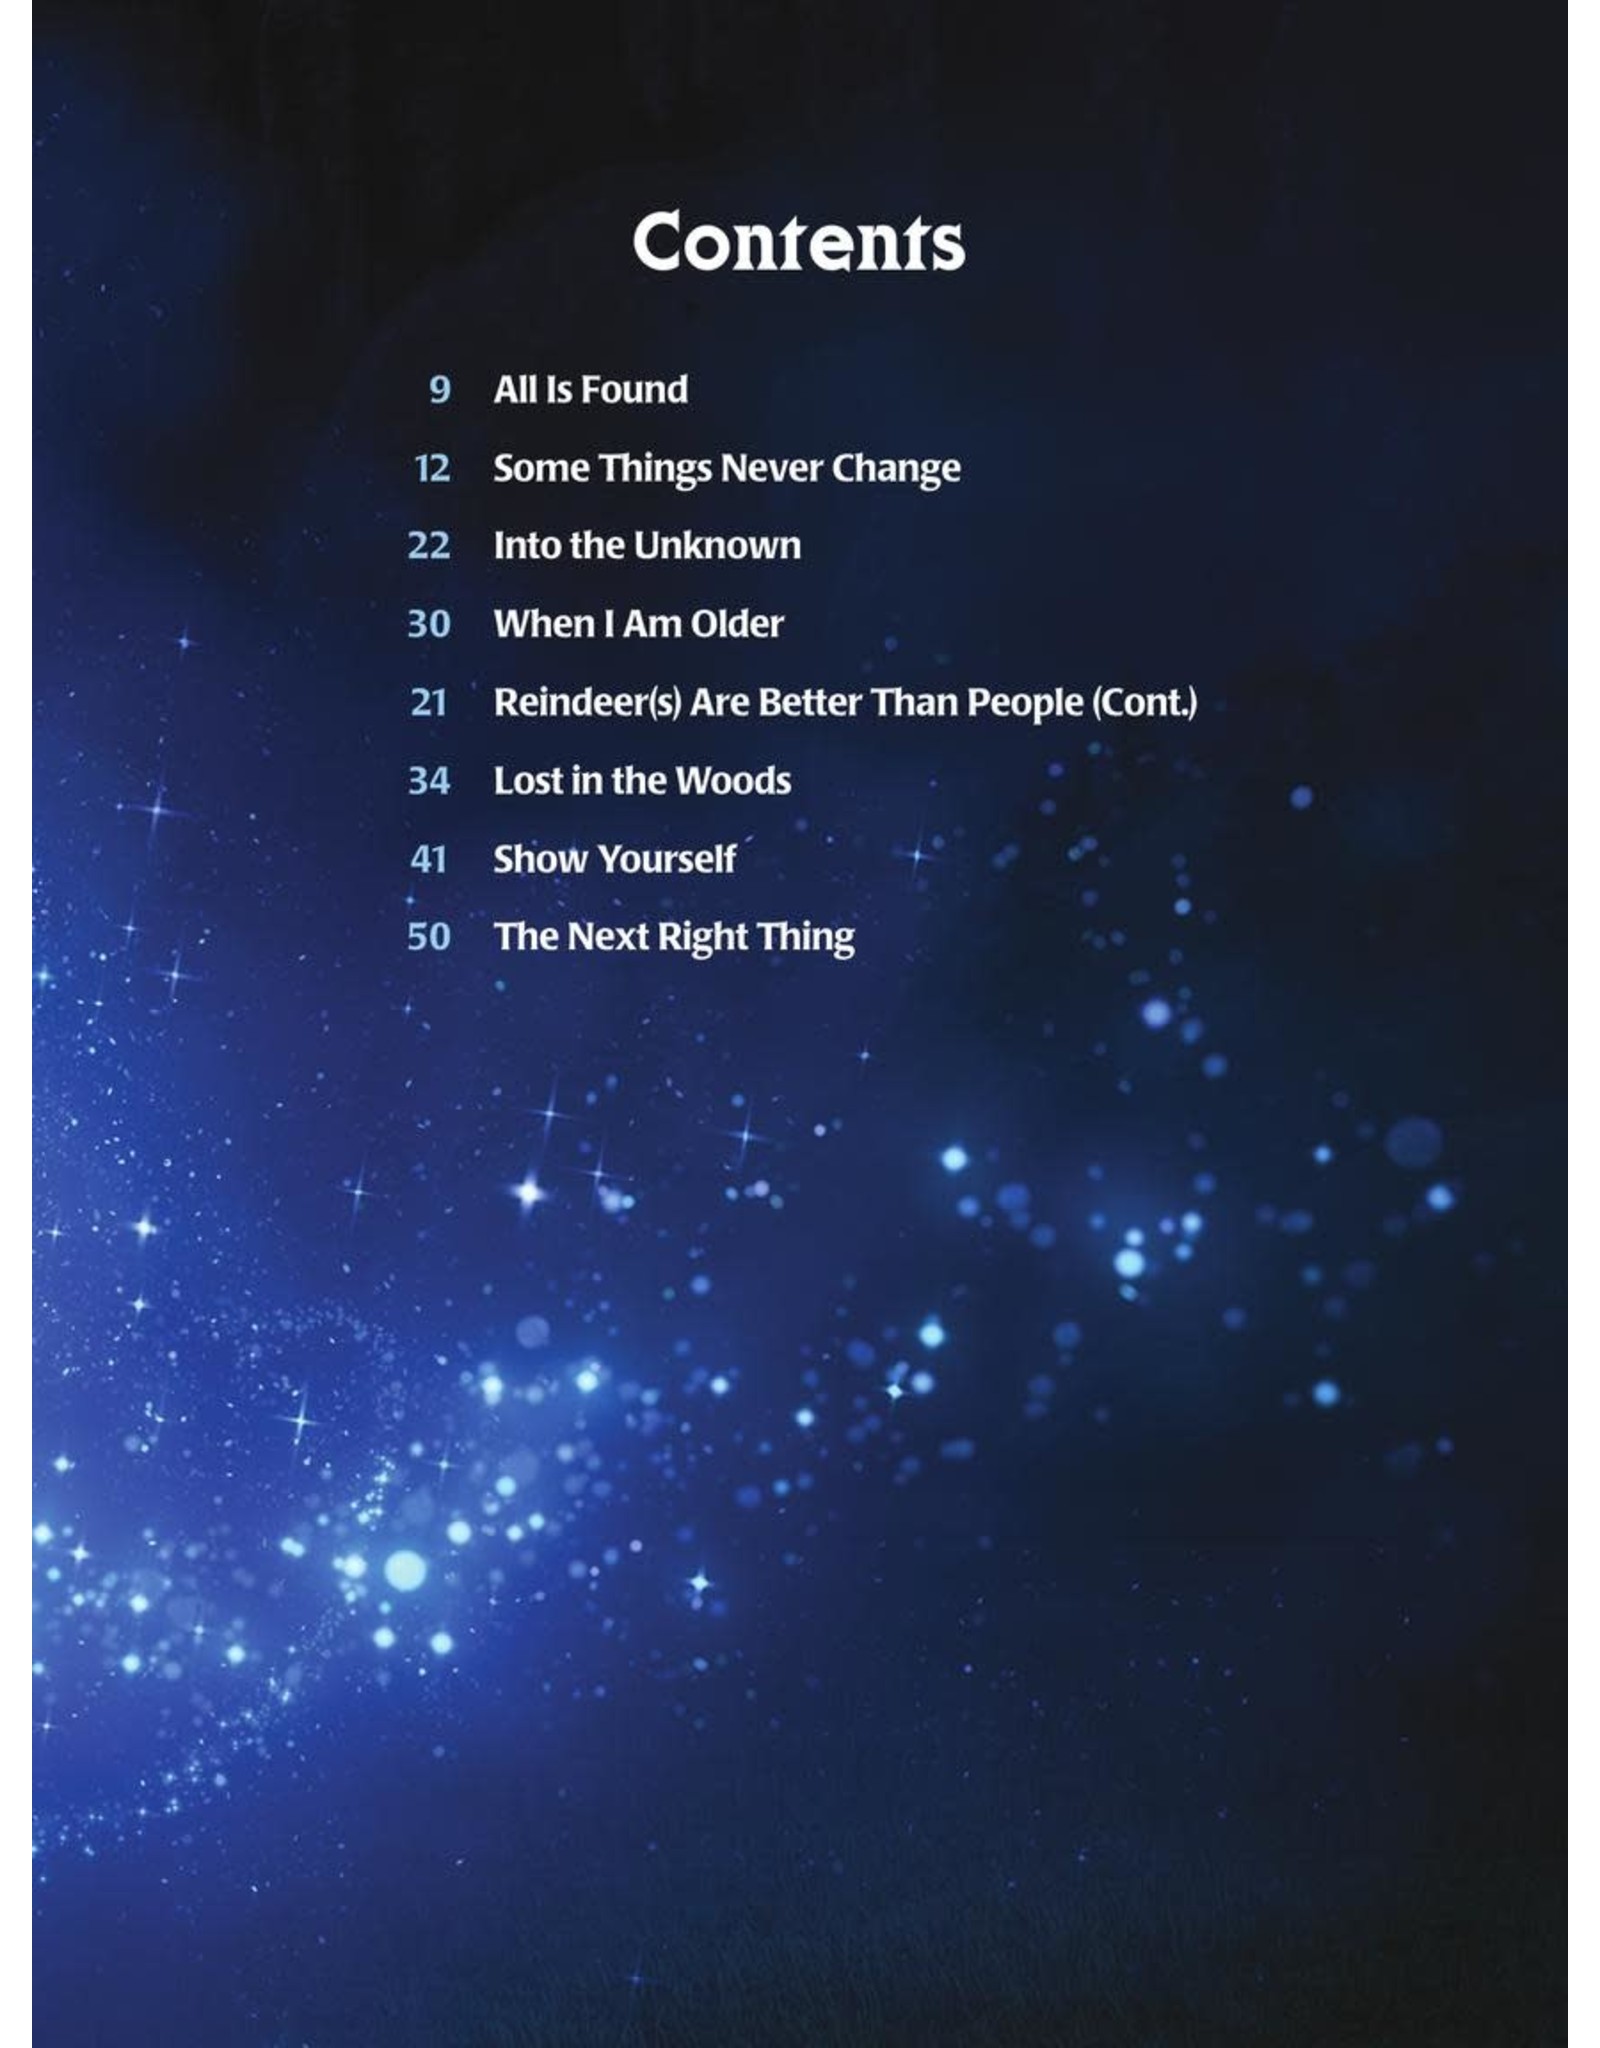 Hal Leonard Frozen II Music from the Motion Picture PVG